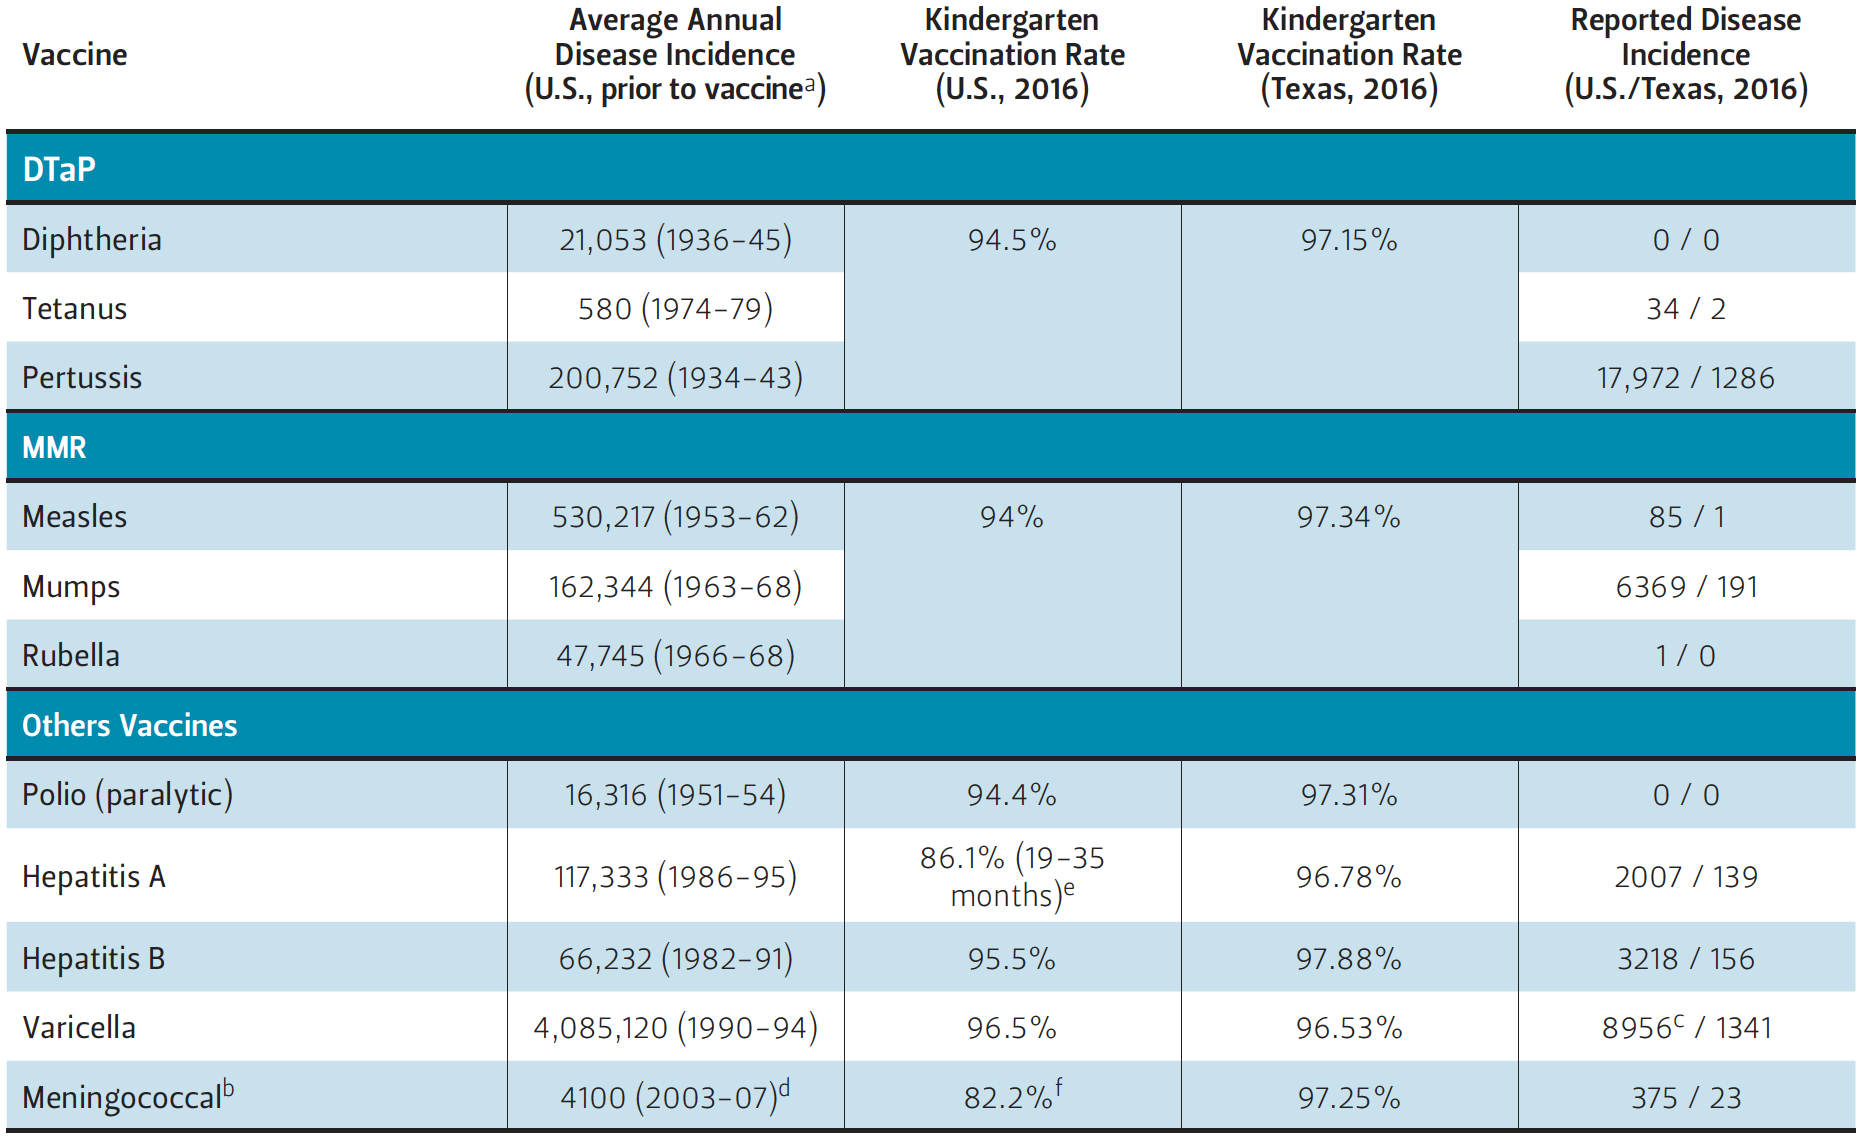 This table compares disease incidence and vaccination rates for Texas and the U.S.